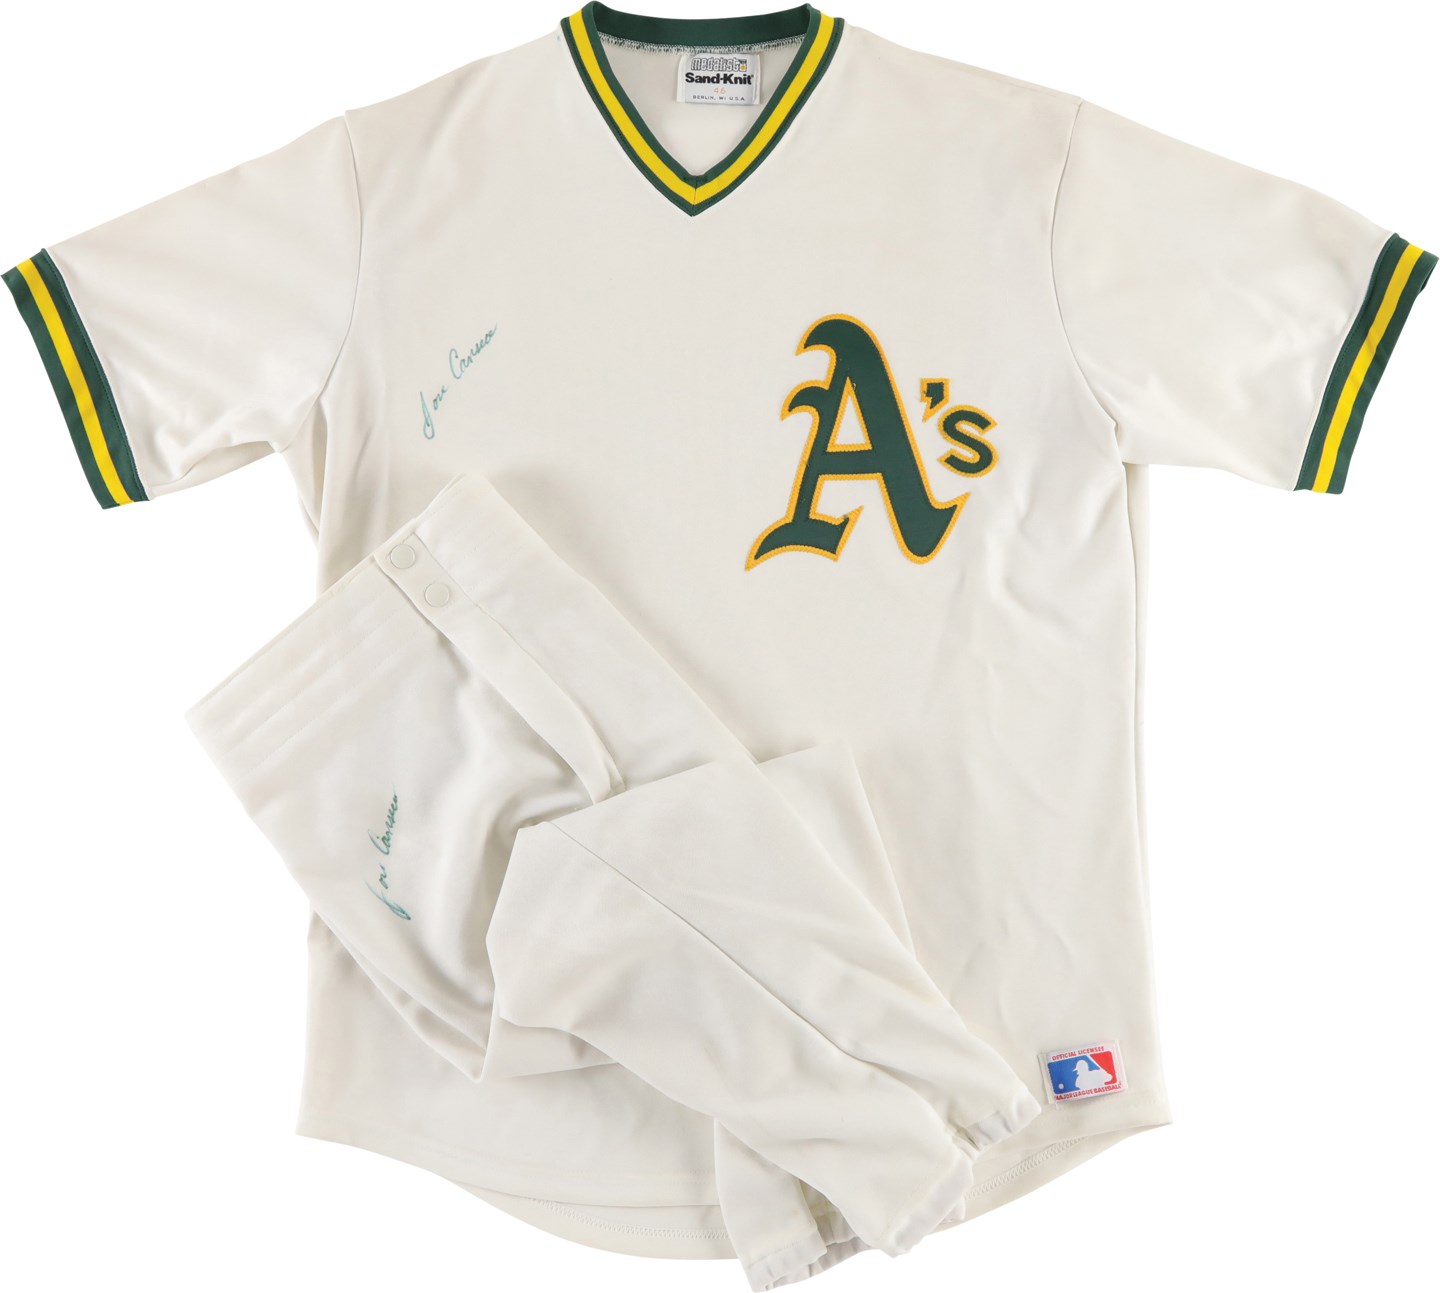 - 1986 Jose Canseco Oakland Athletics Signed Worn Uniform Attributed to First Professional Photoshoot (Canseco LOA)